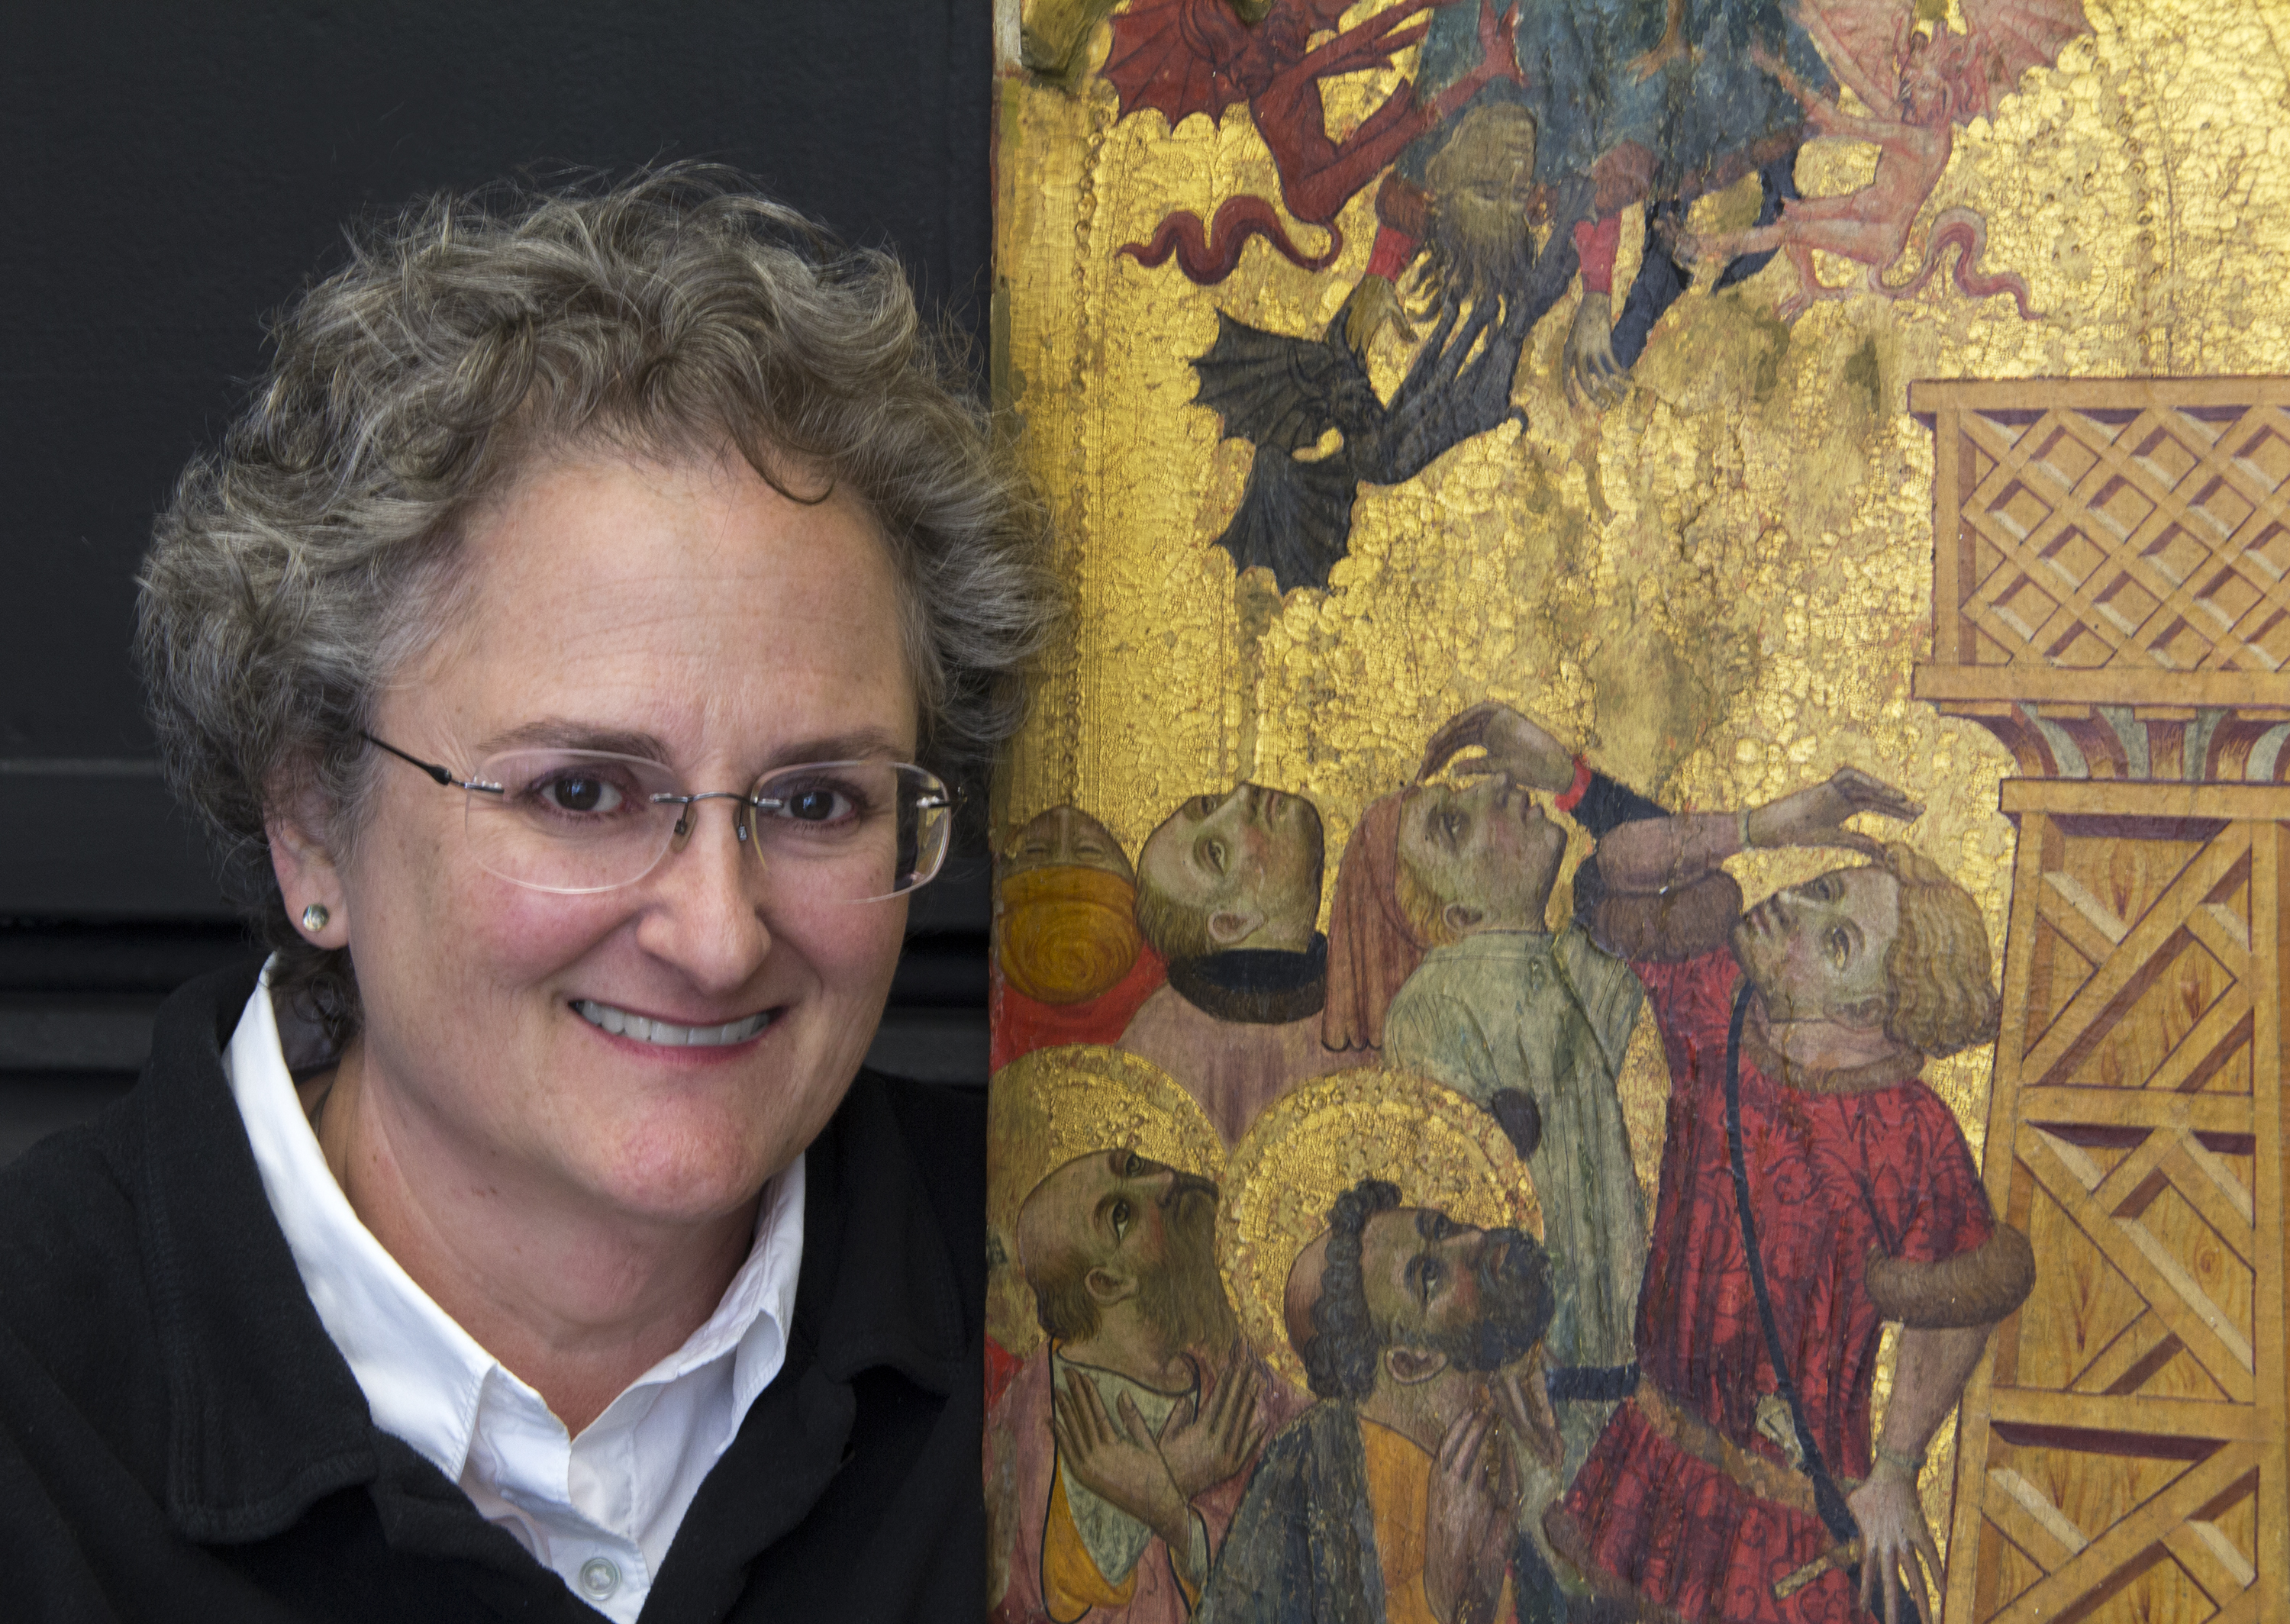 Serena Urry, Chief Conservator of the Cincinnati Art Museum, has worked on a number of paintings for the Dayton Art Institute.  She will speak at DAI on July 24.  CONTRIBUTE